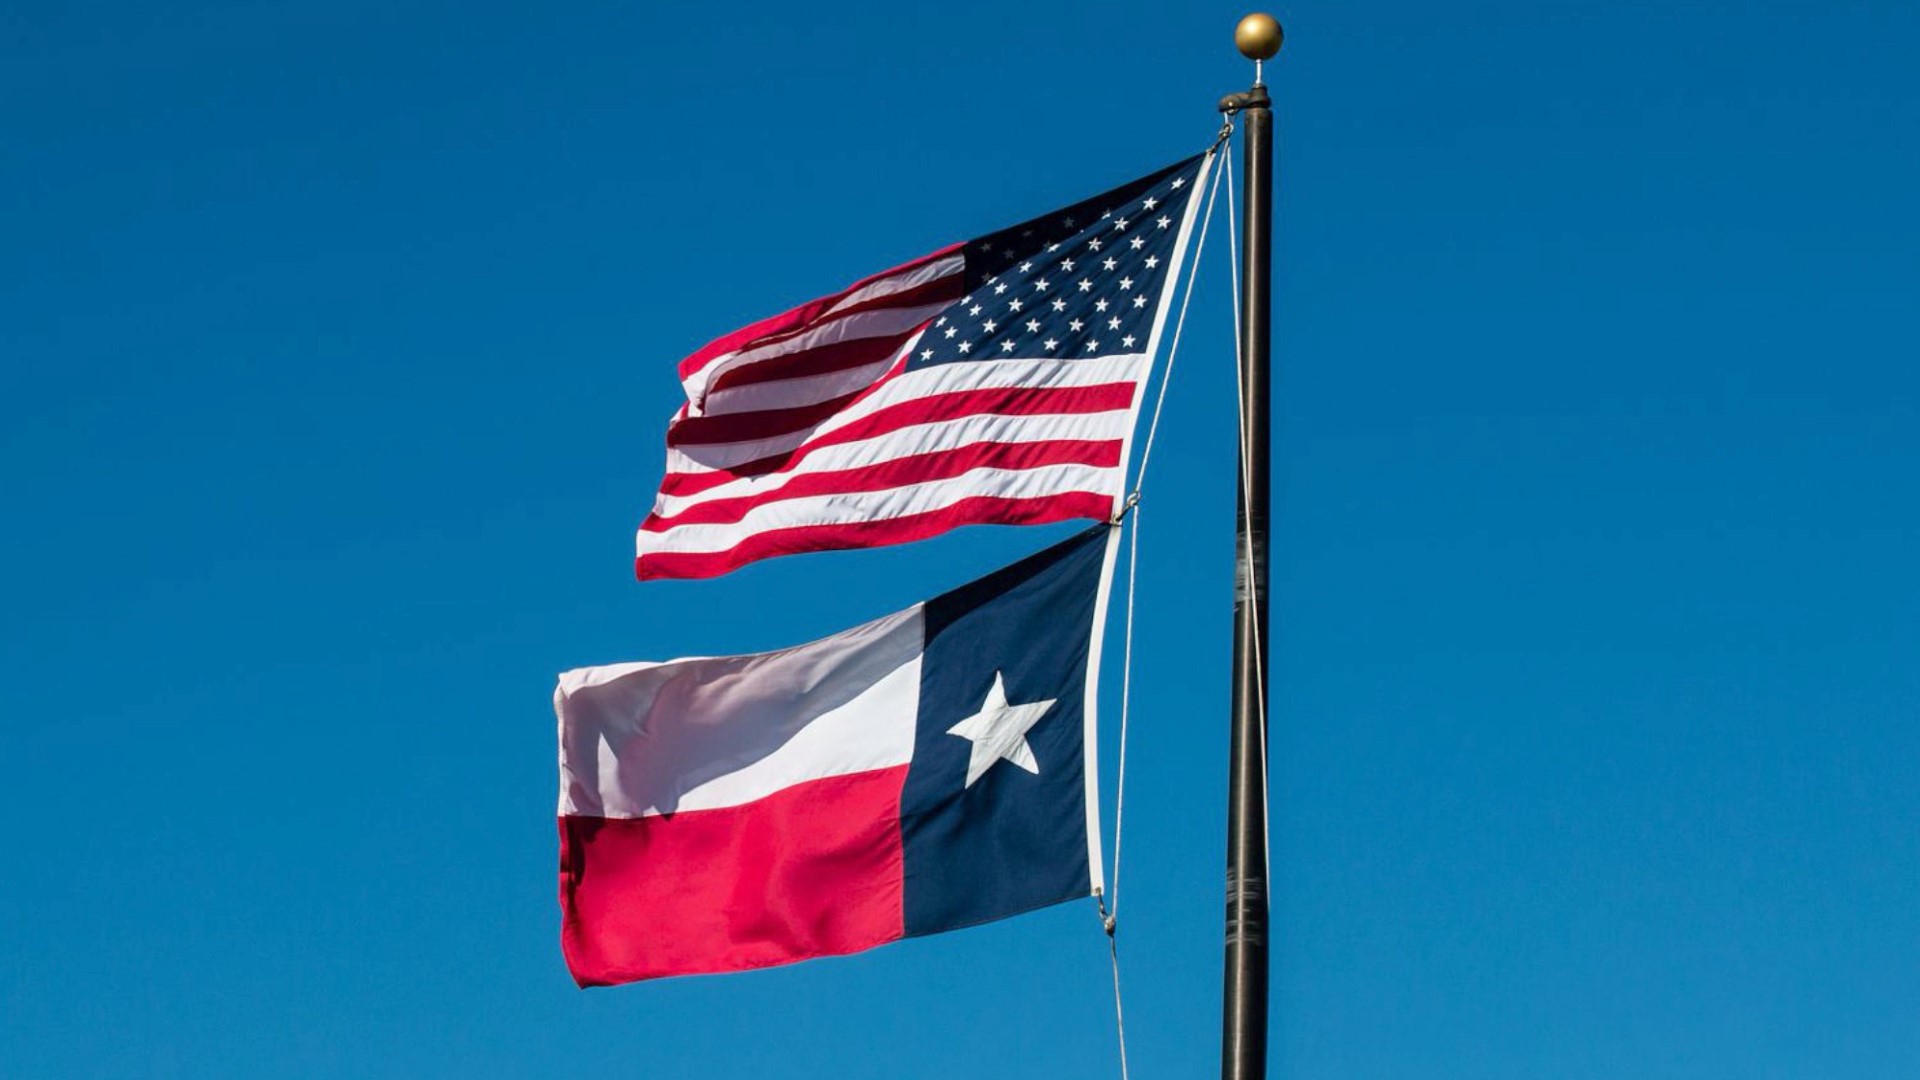 Will Texas leave the Union, can it? Veuer's Tony Spitz has the details.